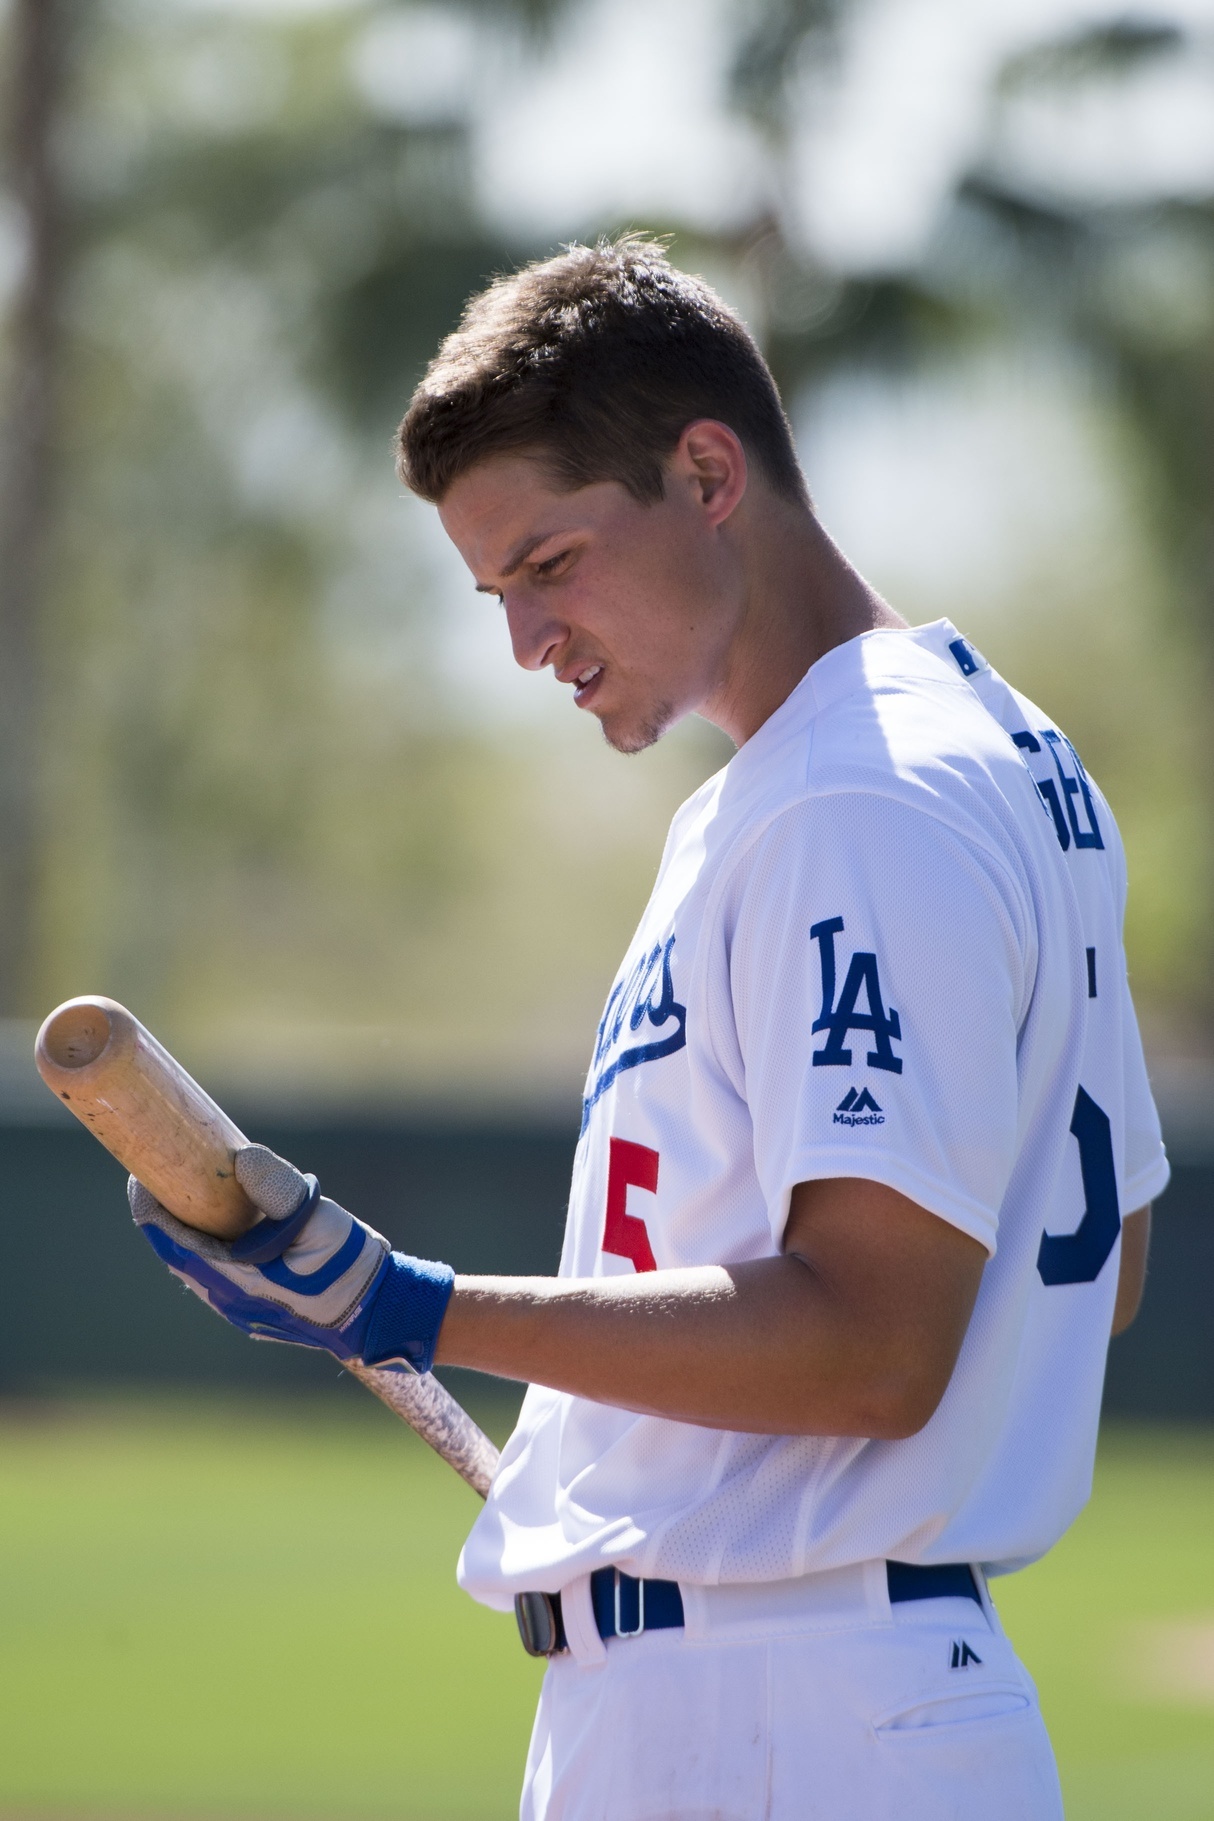 How Corey Seager Became One Of Baseball's Best-Hitting Shortstops